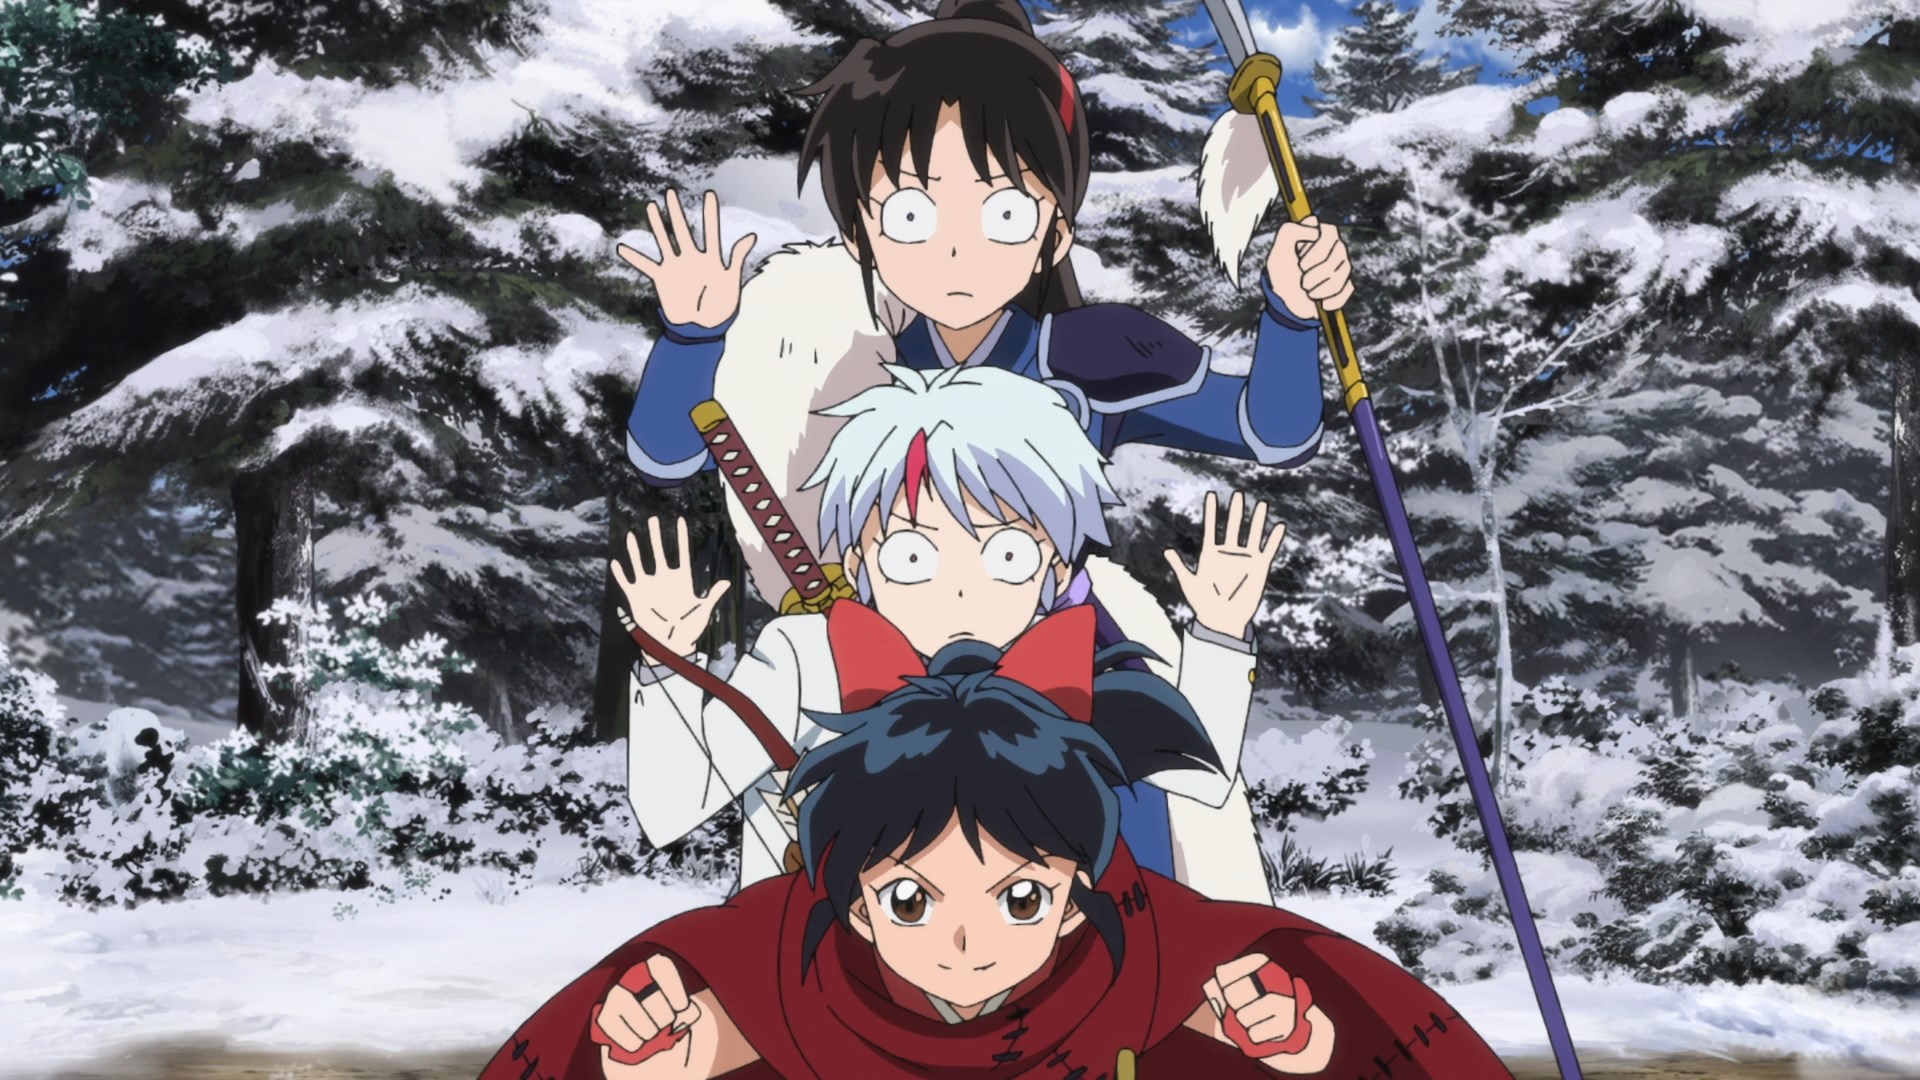 Anime Review: Yashahime: Princess Half-Demon Episodes 1 and 2 - Sequential  Planet